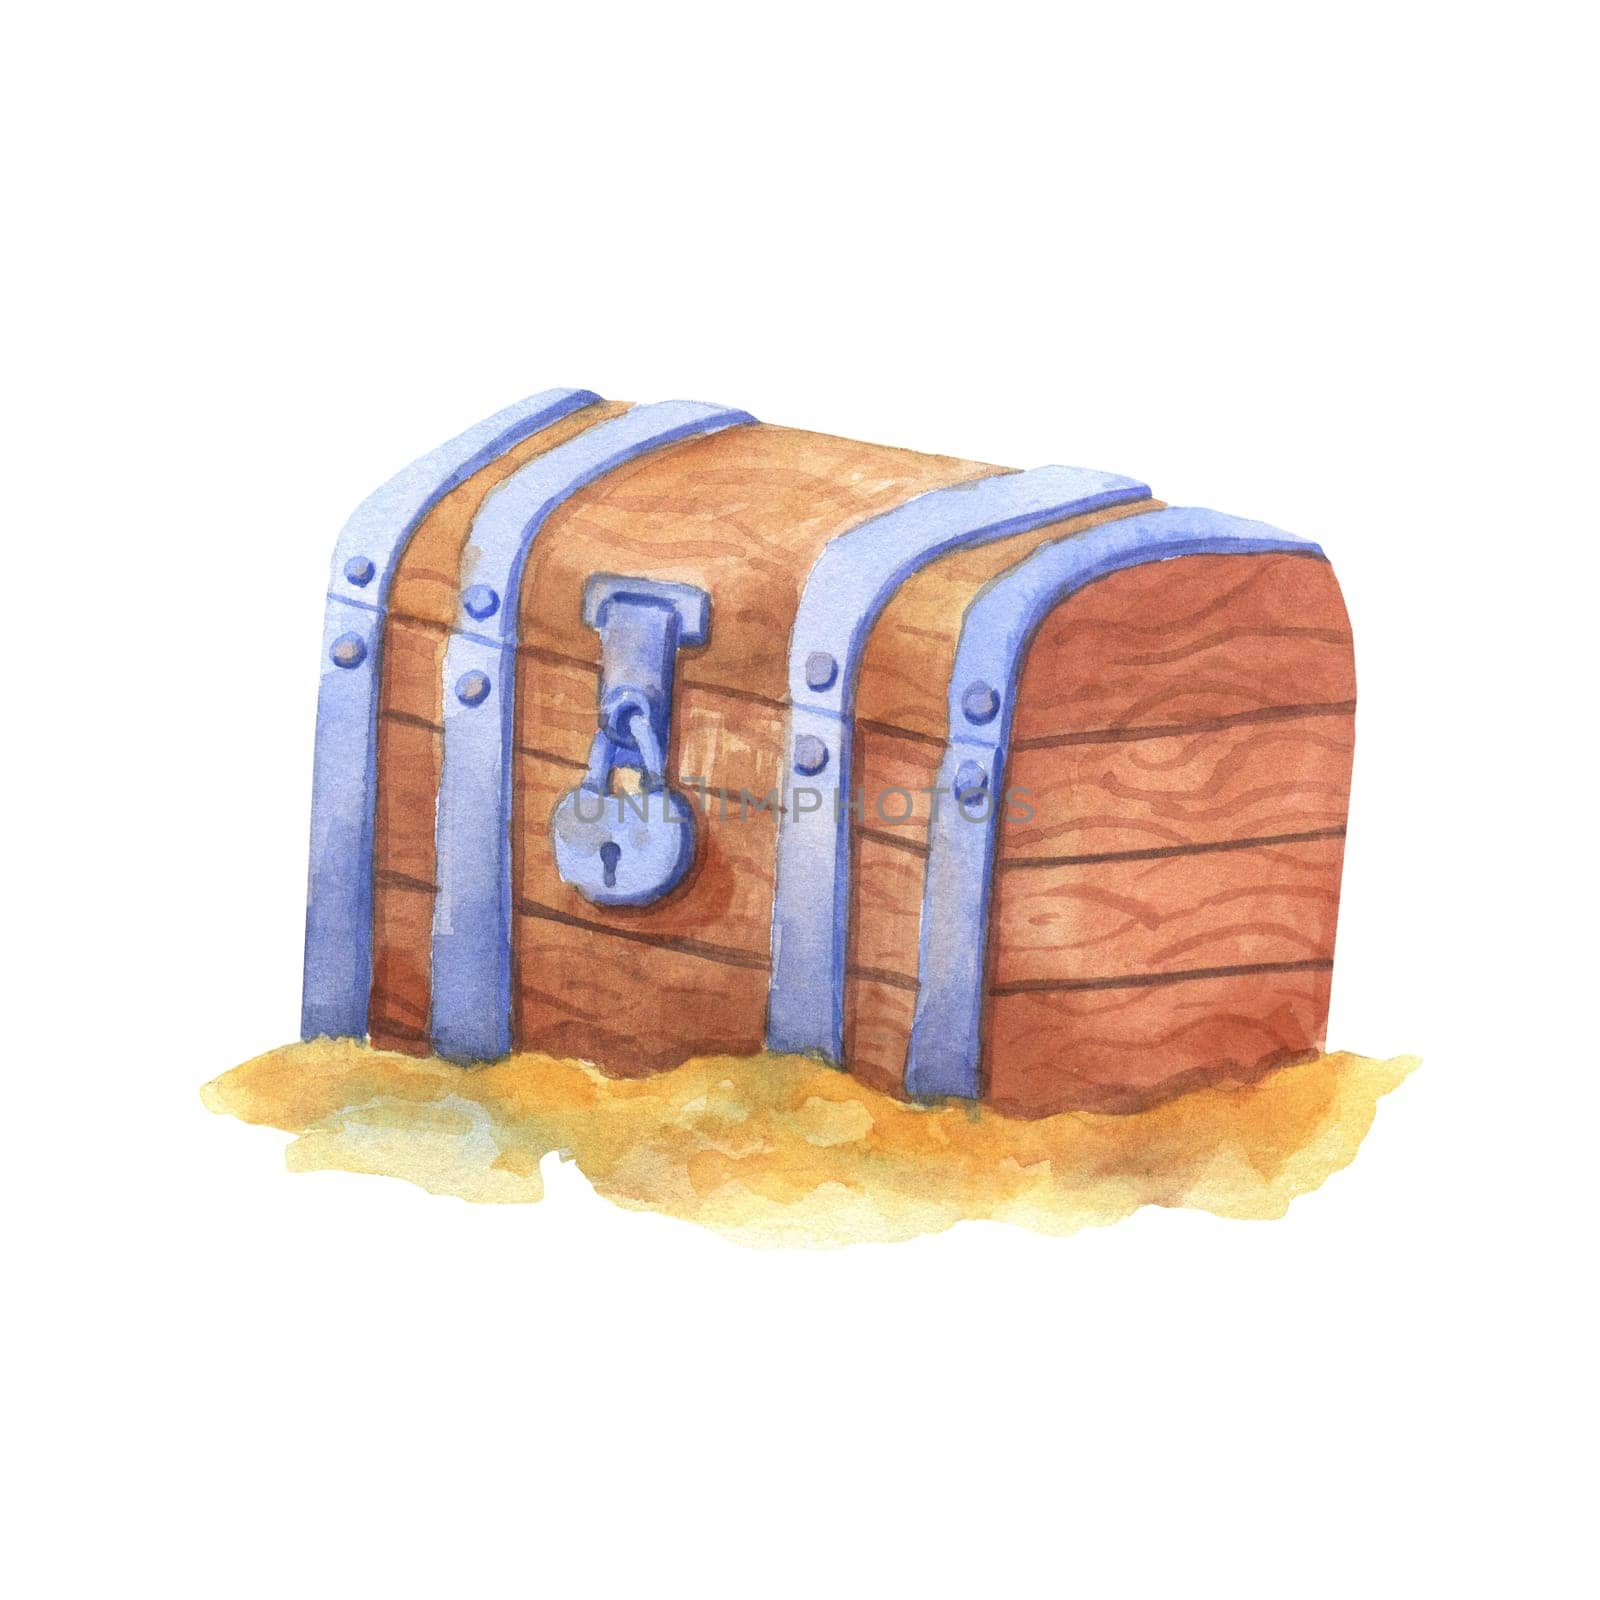 Ancient sunken closed treasure chest on sand. Watercolor illustration isolated on white background